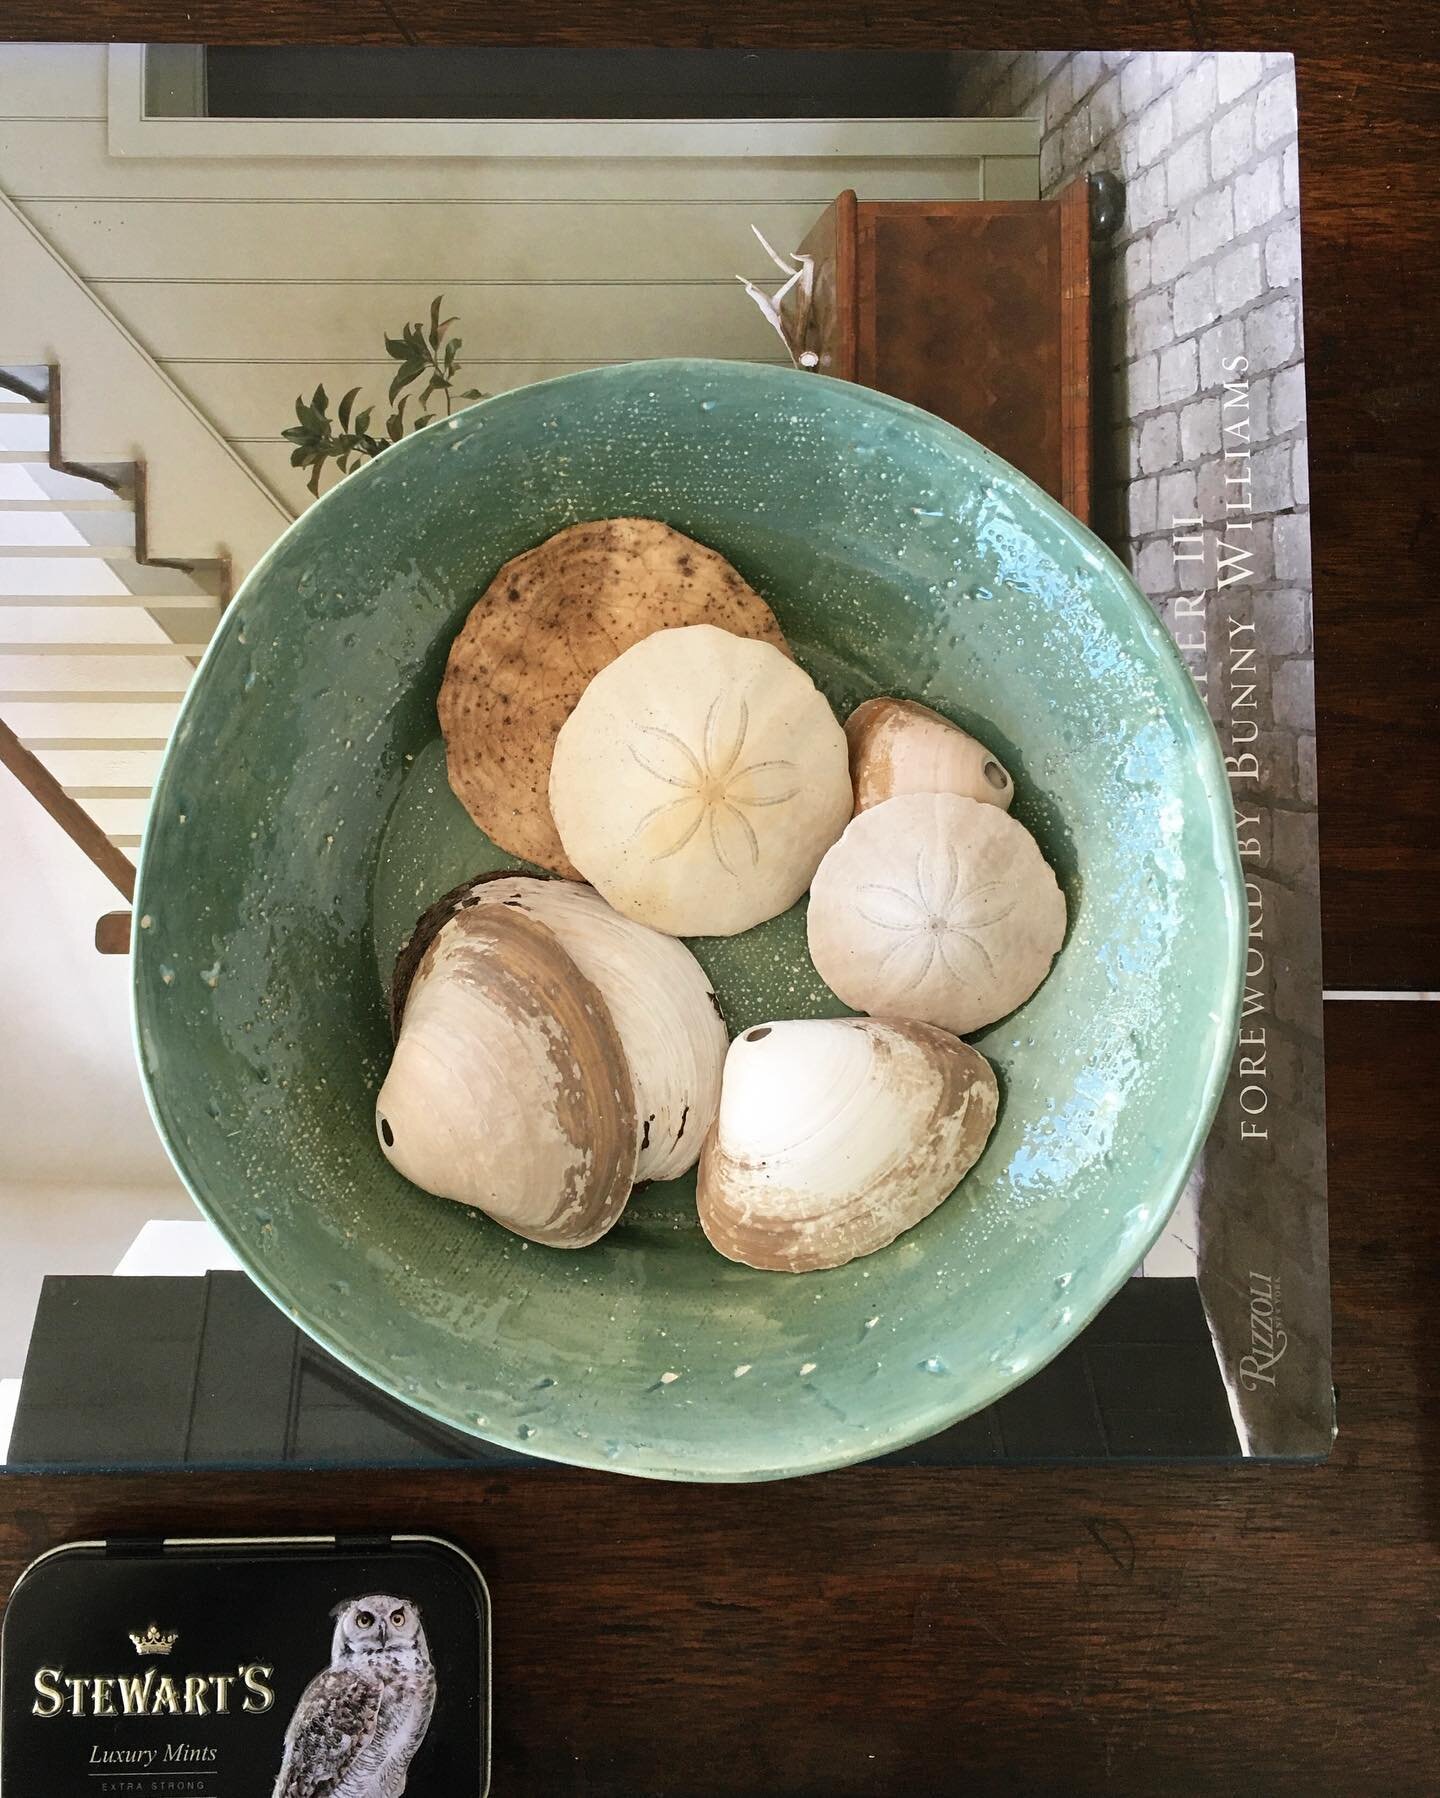 First hand made bowl after firing, already in use as a handy shell dish. At least that part works. 😆#CRIDathome #ceramics #handbuilt #handmade #pottery #potterylove #bowl #shells #seaside #beachlife #potterystudio #craft #creativeart #homewares